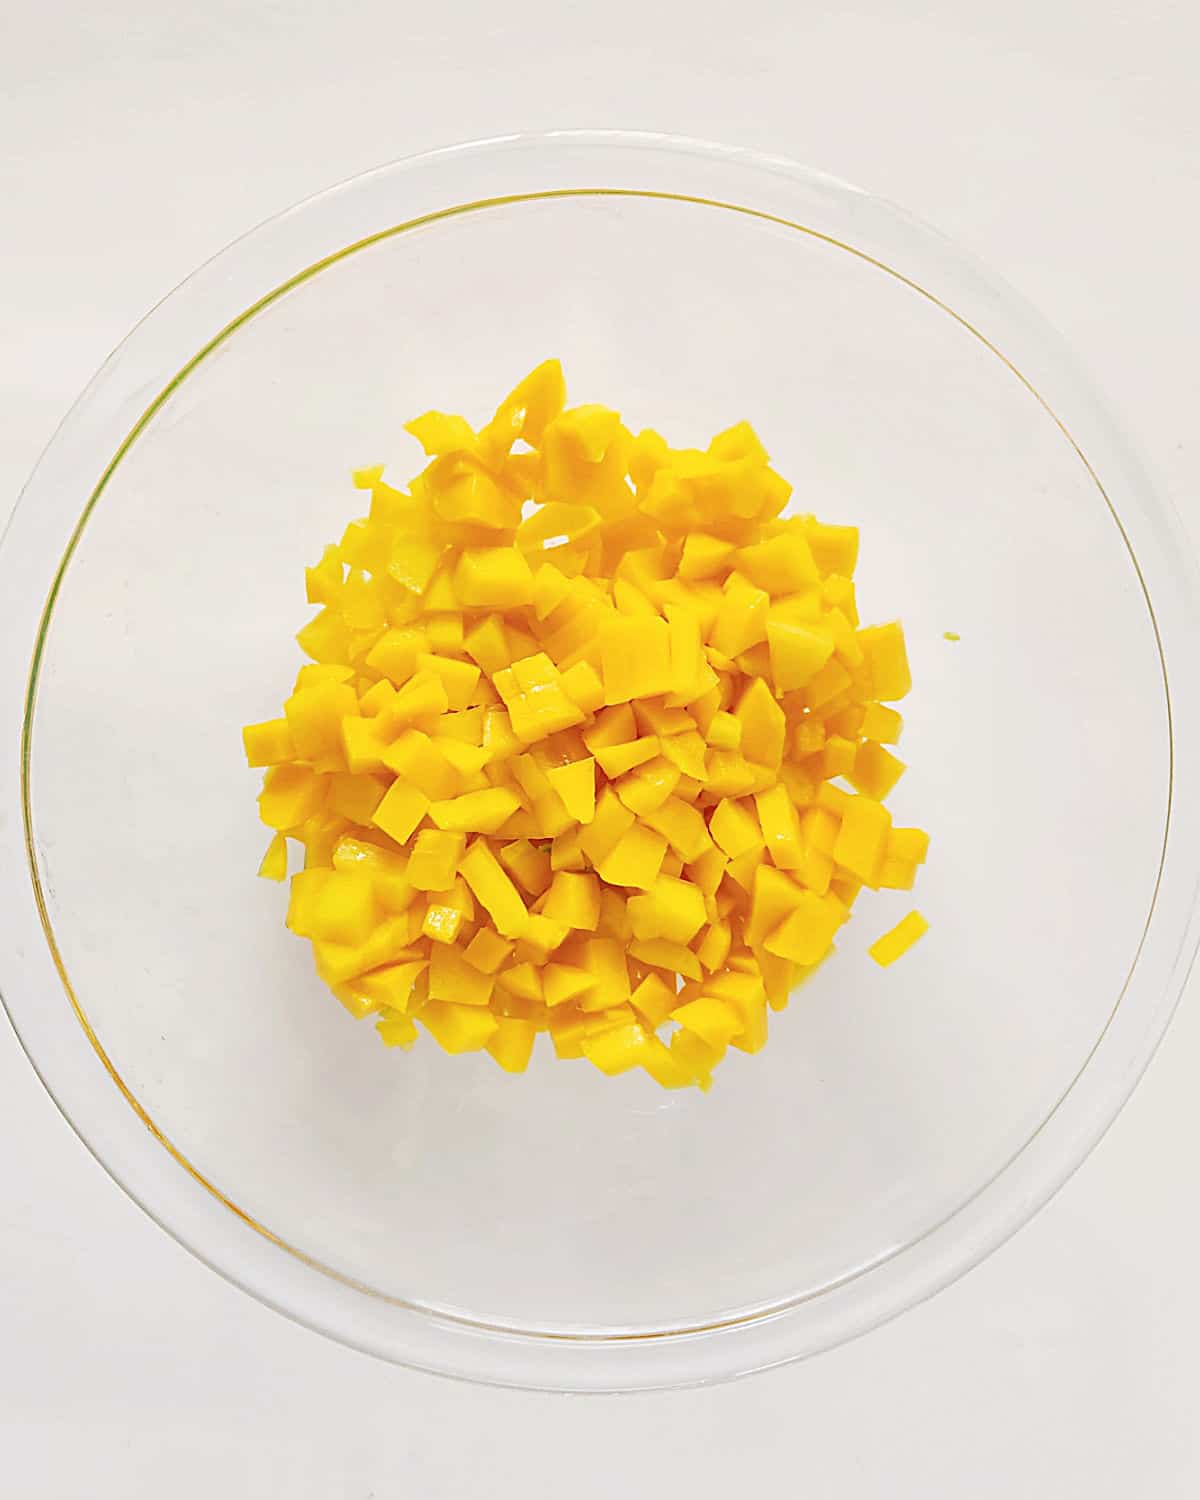 Chopped mango and peach in a glass bowl on a white surface.